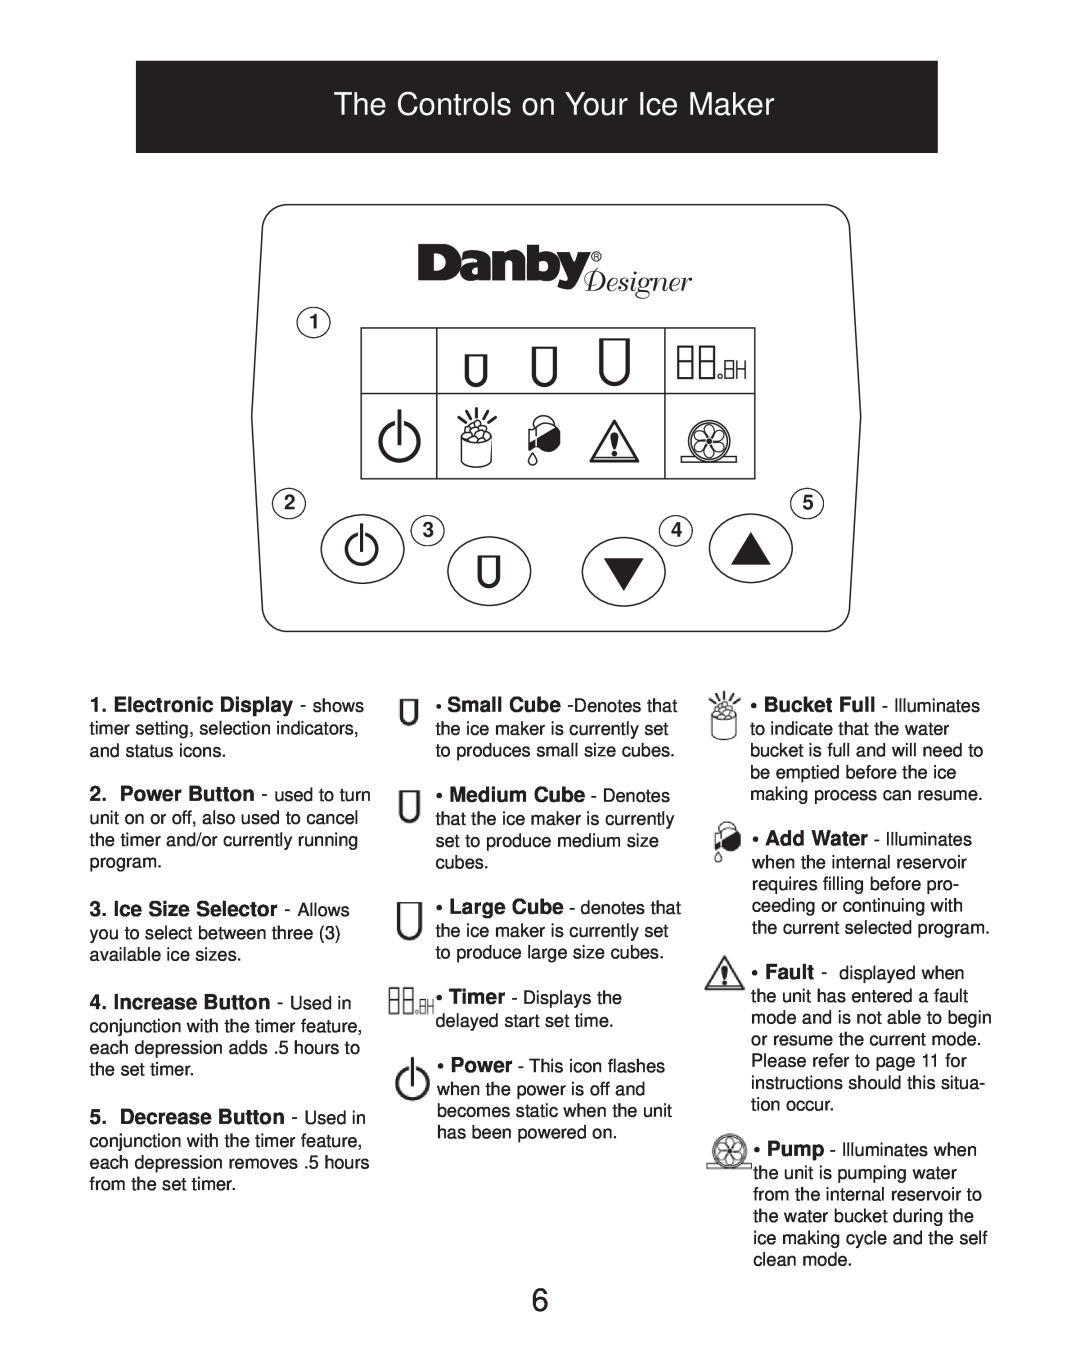 Danby dim1524w manual The Controls on Your Ice Maker 